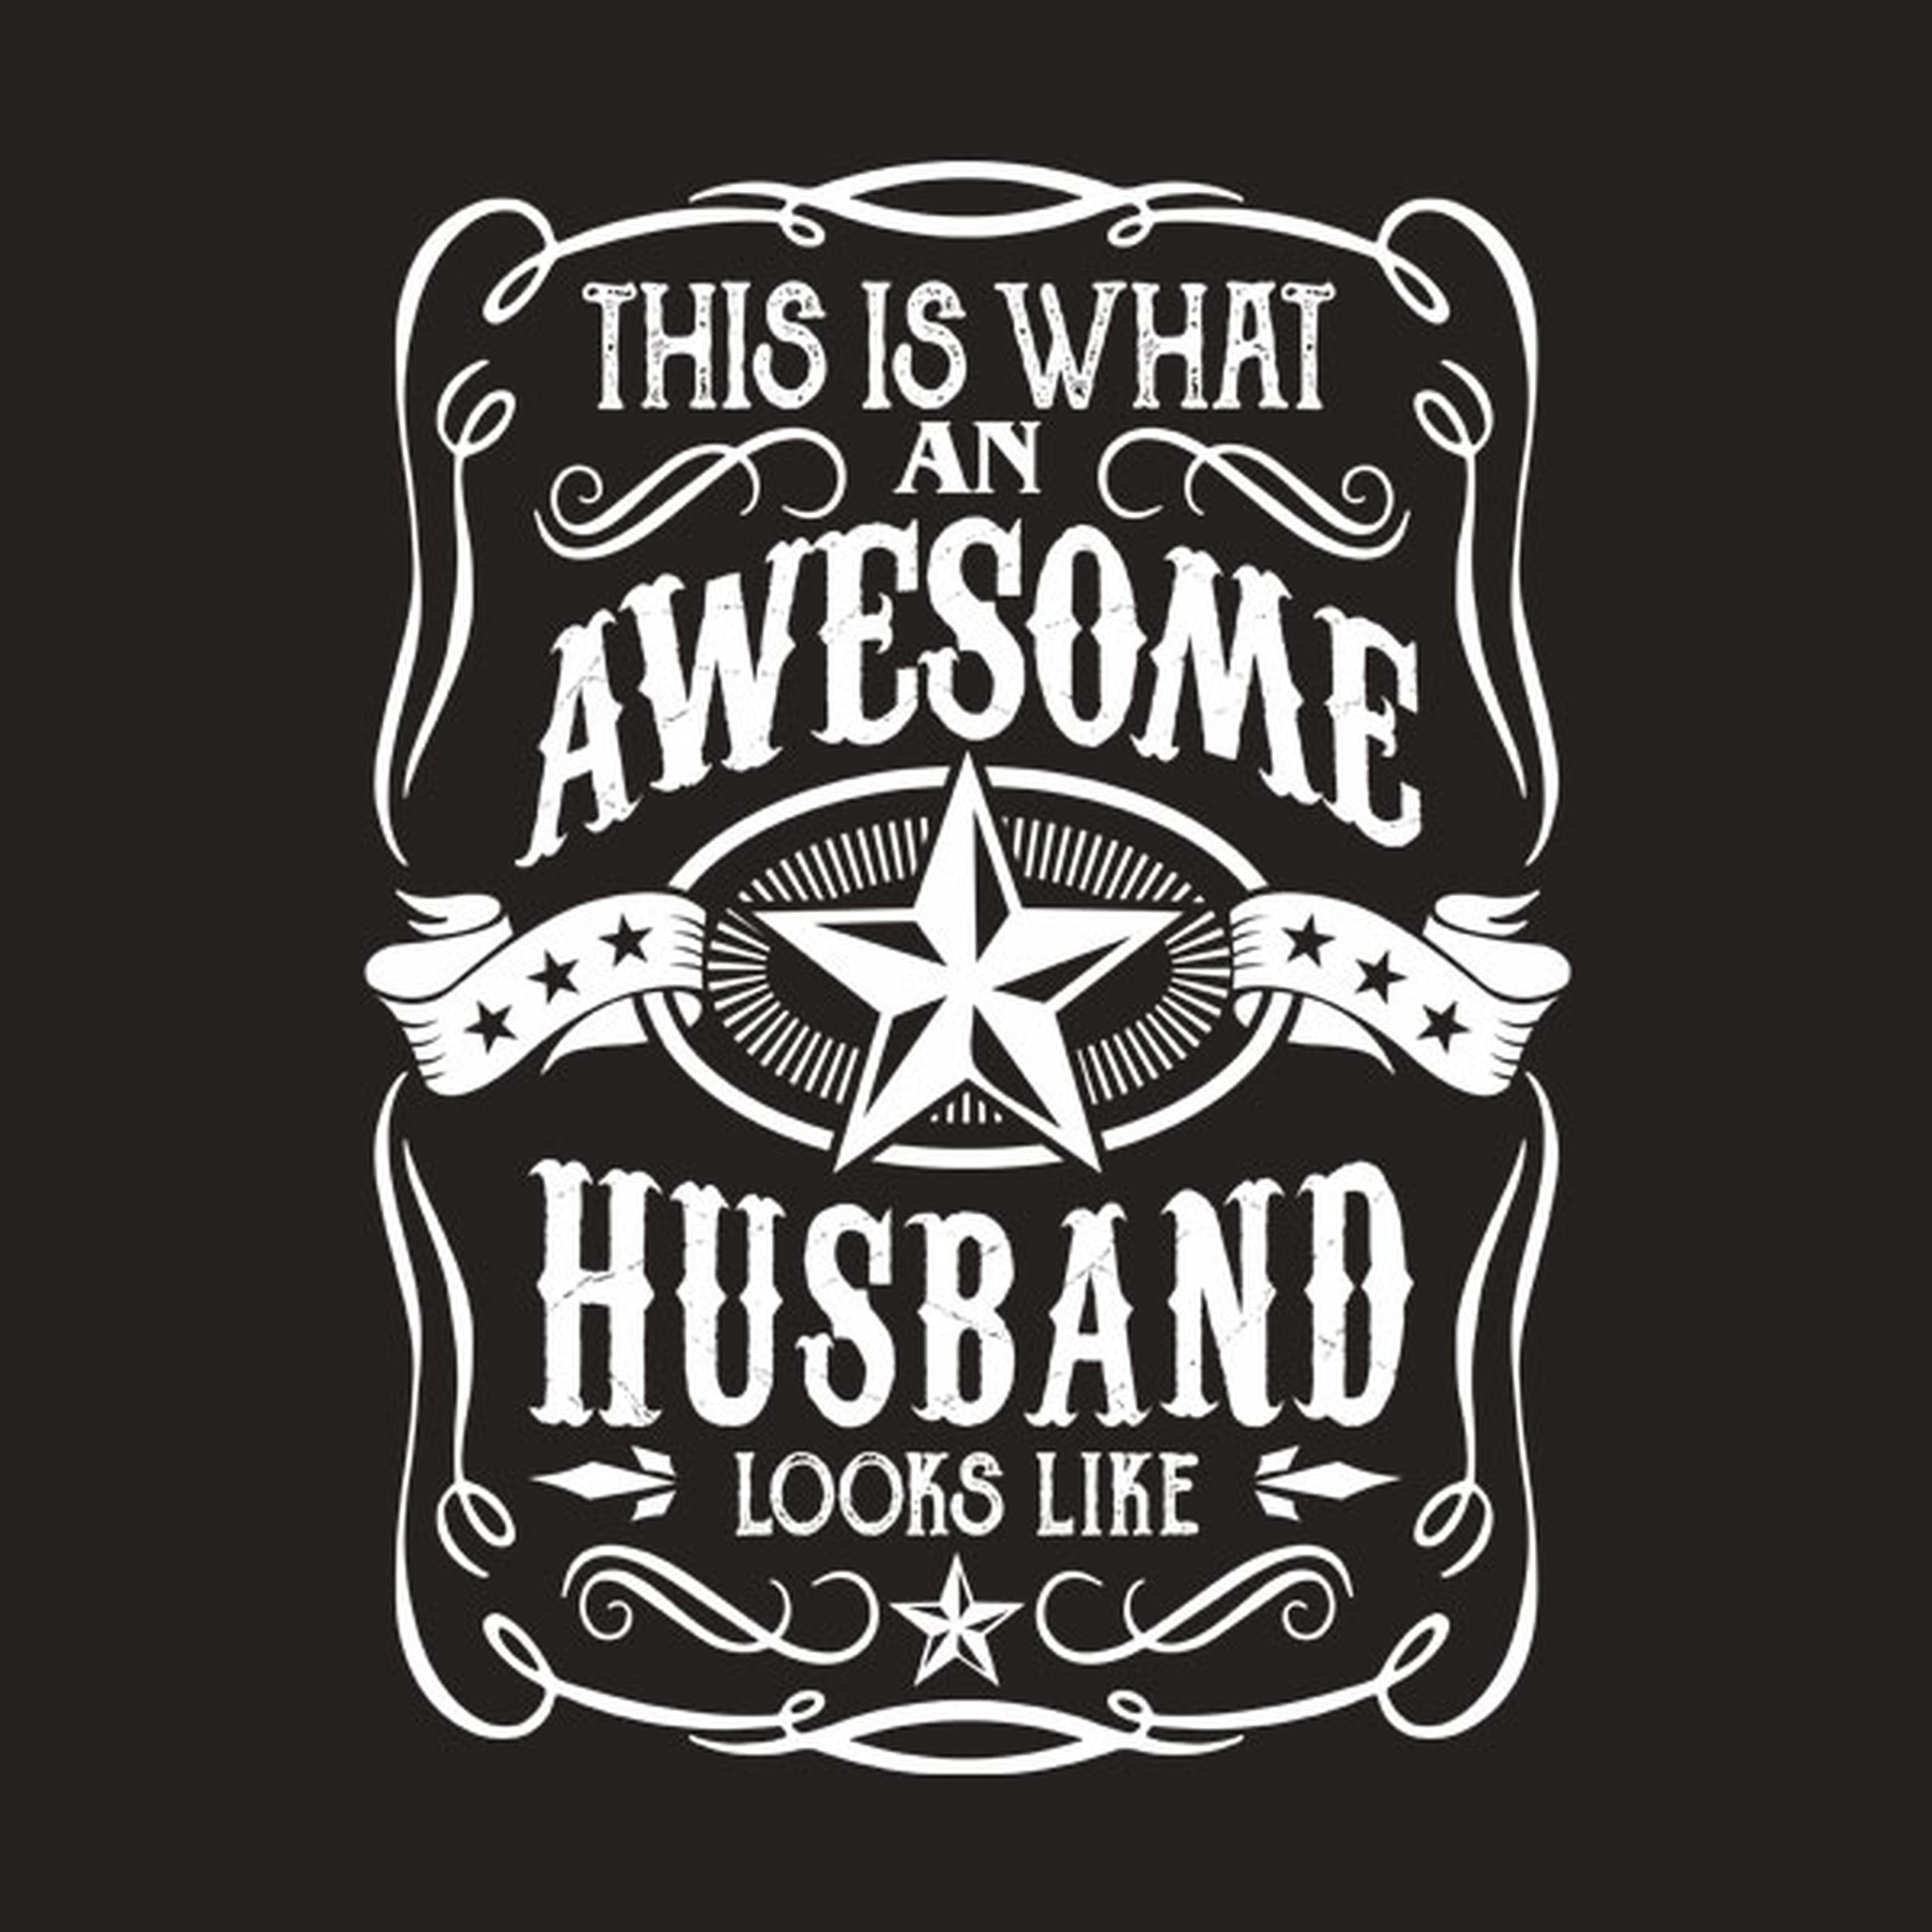 This is what an awesome husband looks like - T-shirt